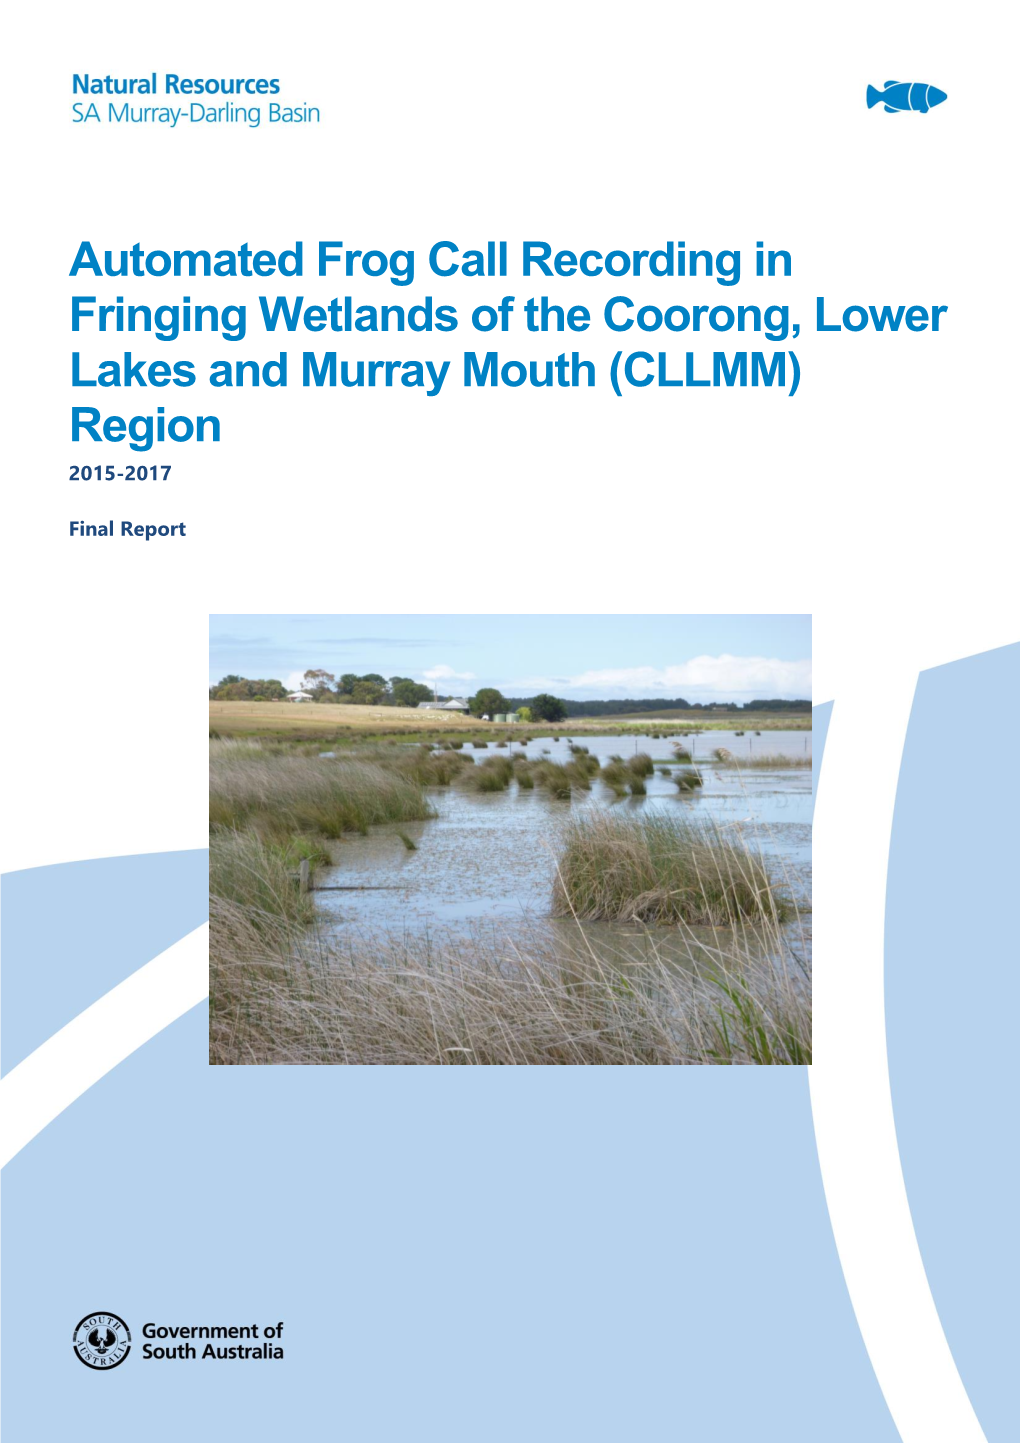 Automated Frog Call Recording in Fringing Wetlands of the Coorong, Lower Lakes and Murray Mouth (CLLMM) Region 2015-2017